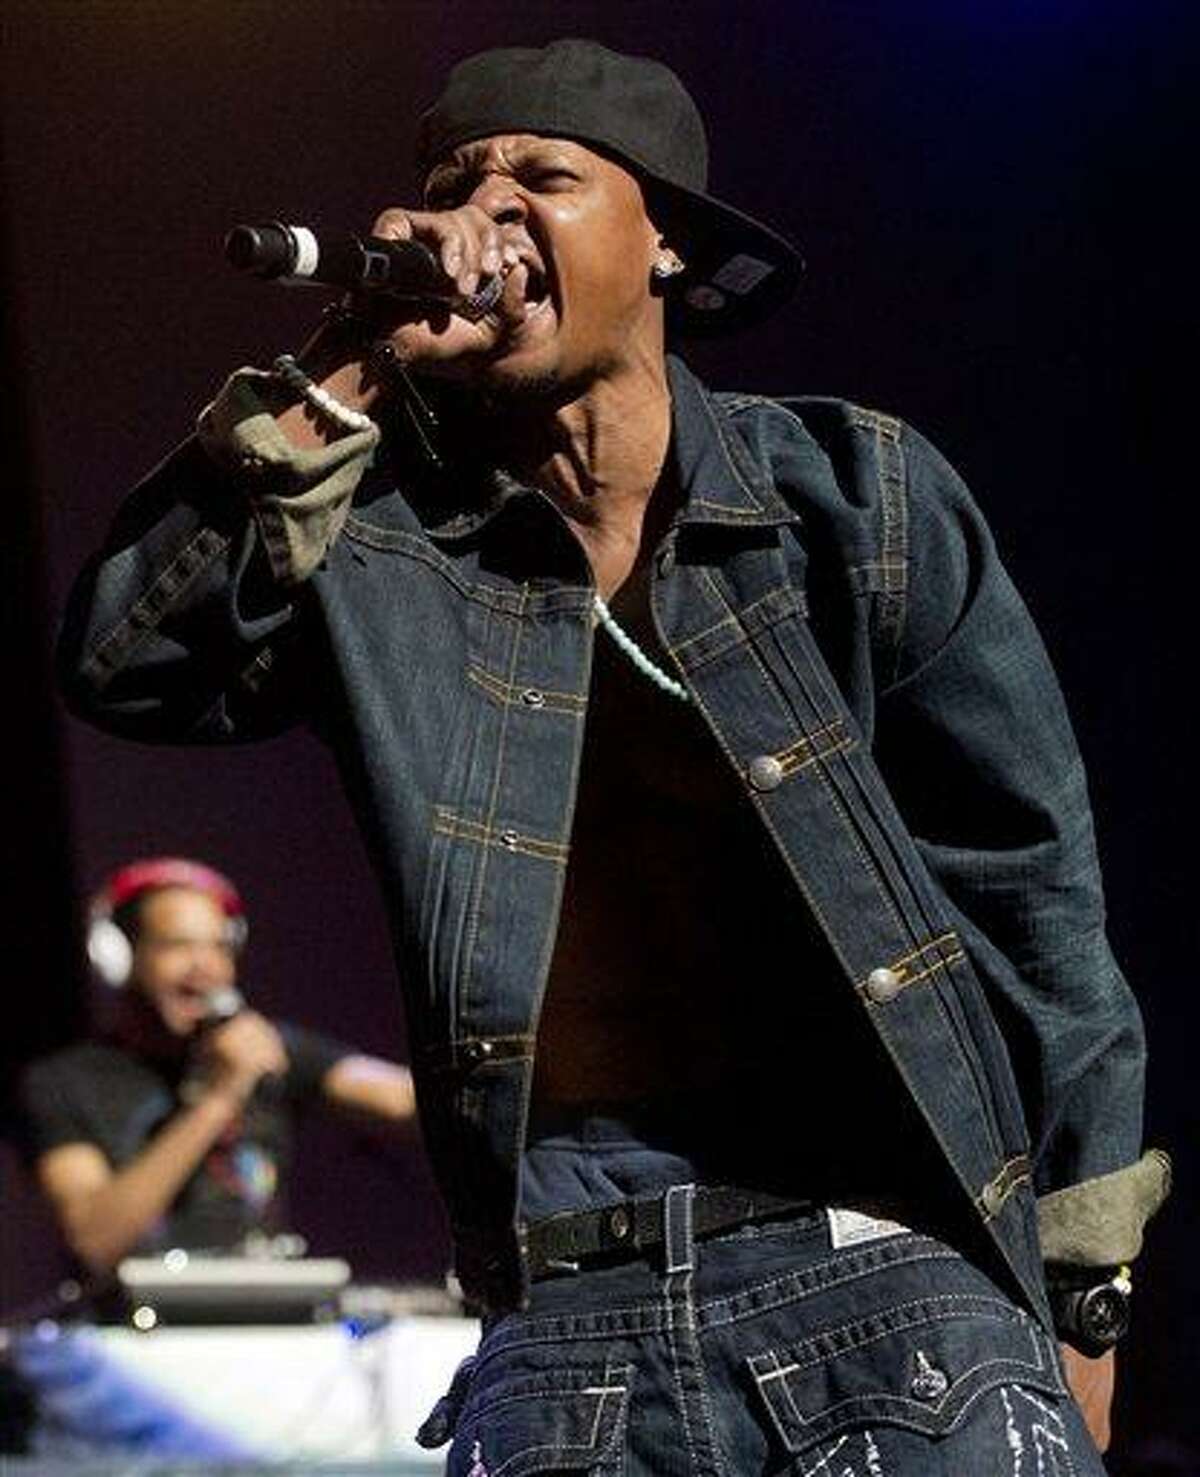 In this Feb. 23, 2013 photo, Chris Kelly of Kris Kross performs on stage at the Fox Theatre in Atlanta during the So So Def 20th Anniversary Concert. Kelly, half of the 1990s kid rap duo Kris Kross who made one of the decade's most memorable songs with the frenetic "Jump," died Wednesday, May 1, 2013, according to authorities. He was 34. (AP Photo/Atlanta Journal-Constitution, Jonathan Phillips)